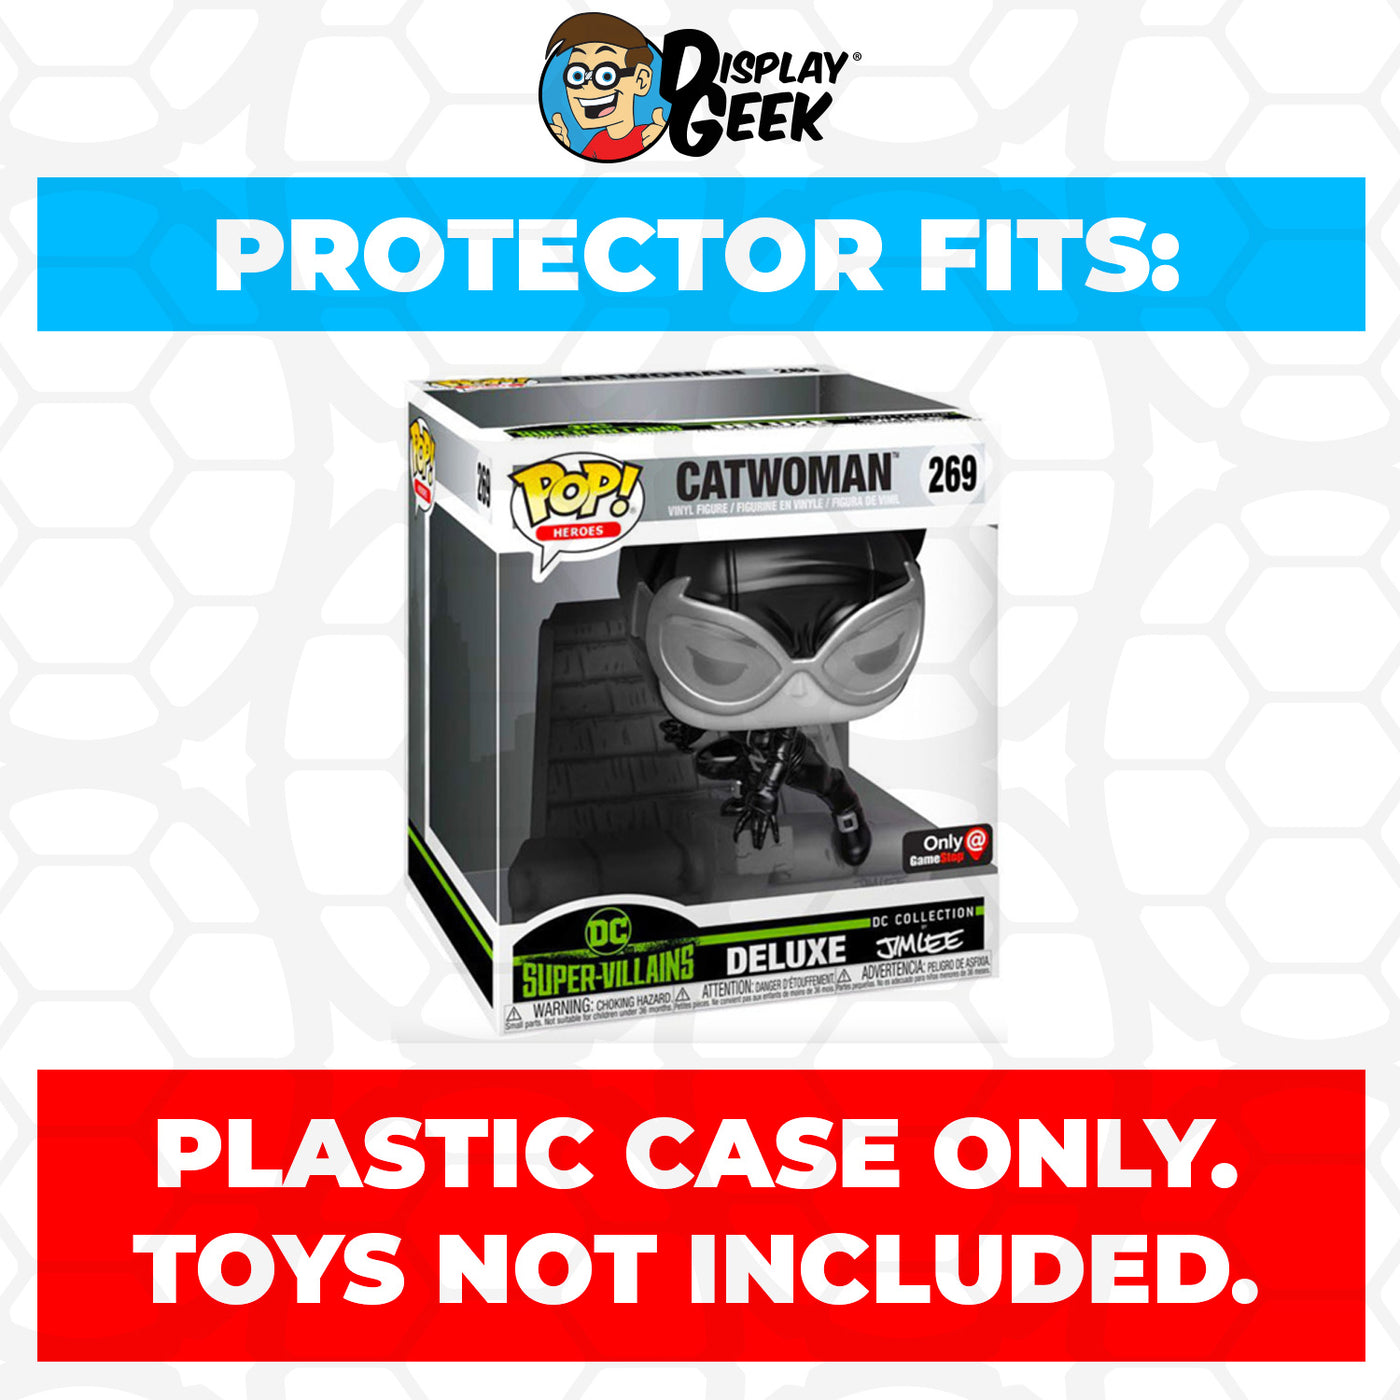 Pop Protector for Catwoman Jim Lee Black & White #269 Funko Pop Deluxe on The Protector Guide App by Display Geek